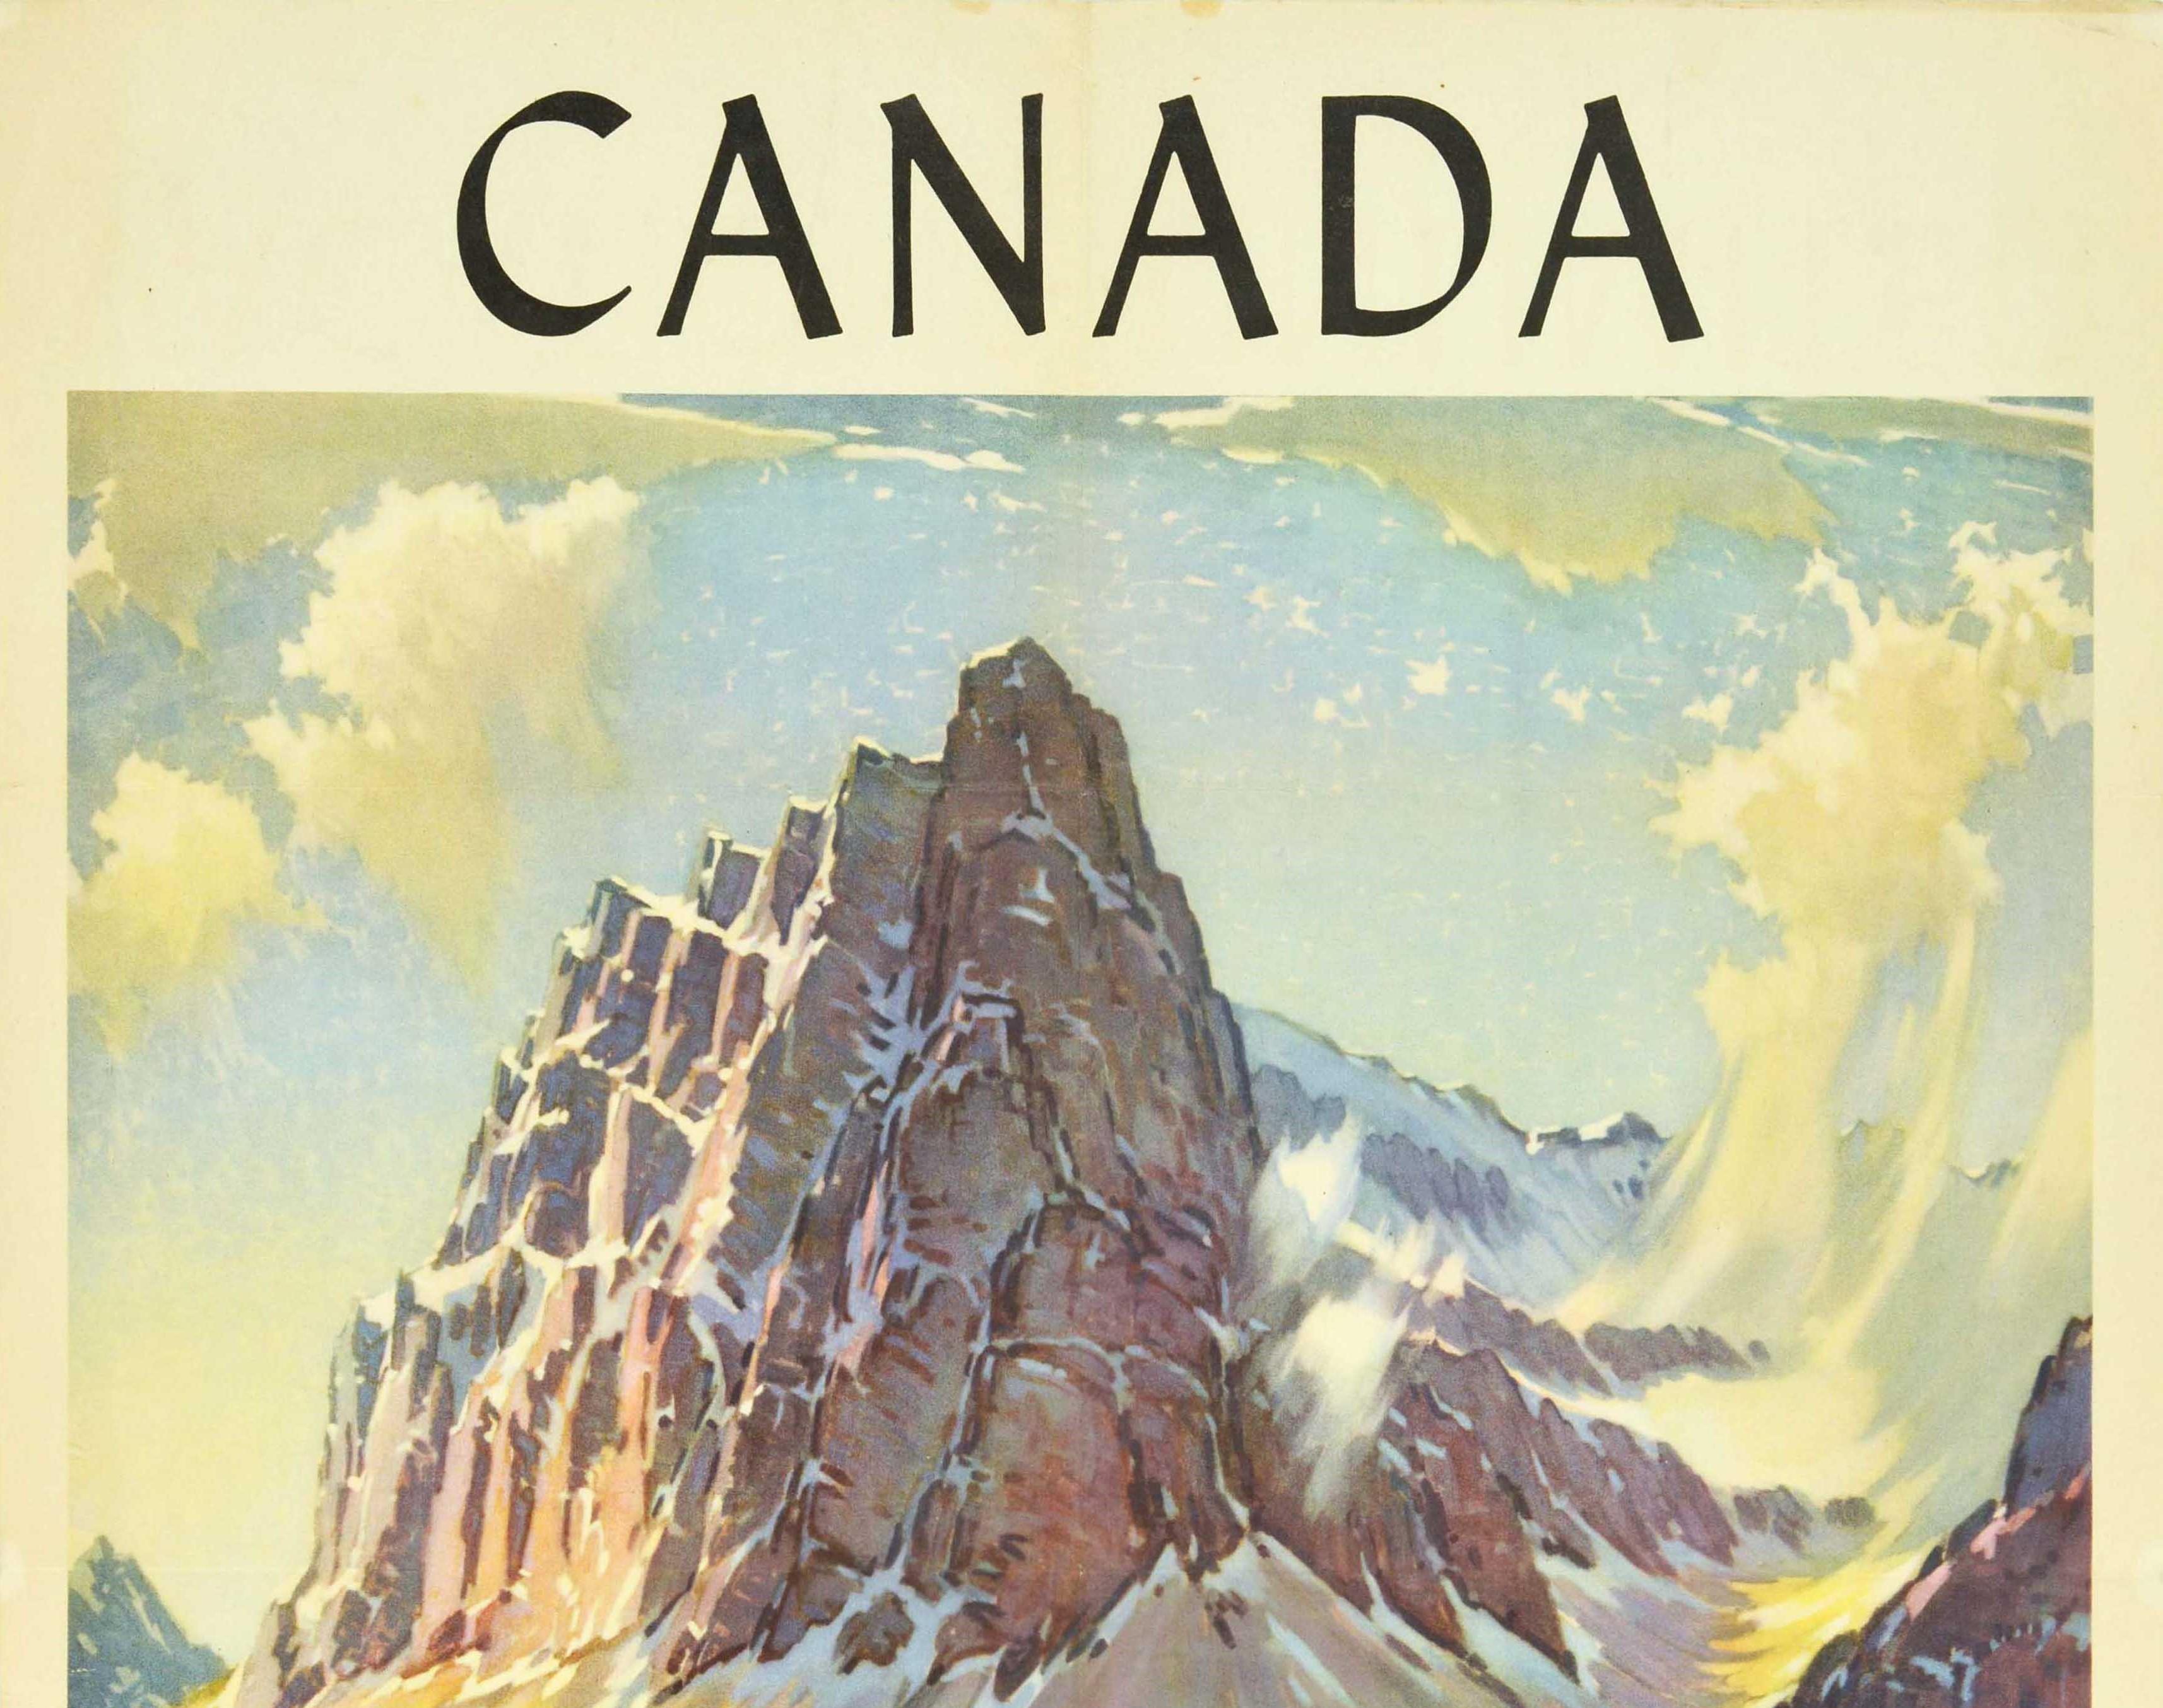 Original vintage tourism poster issued by the Canadian Government Travel Bureau - Canada Vacations Unlimited - featuring a painting by the British born Canadian painter Alfred Crocker Leighton RCA (1901-1965) entitled Mount Eisenhower Canadian